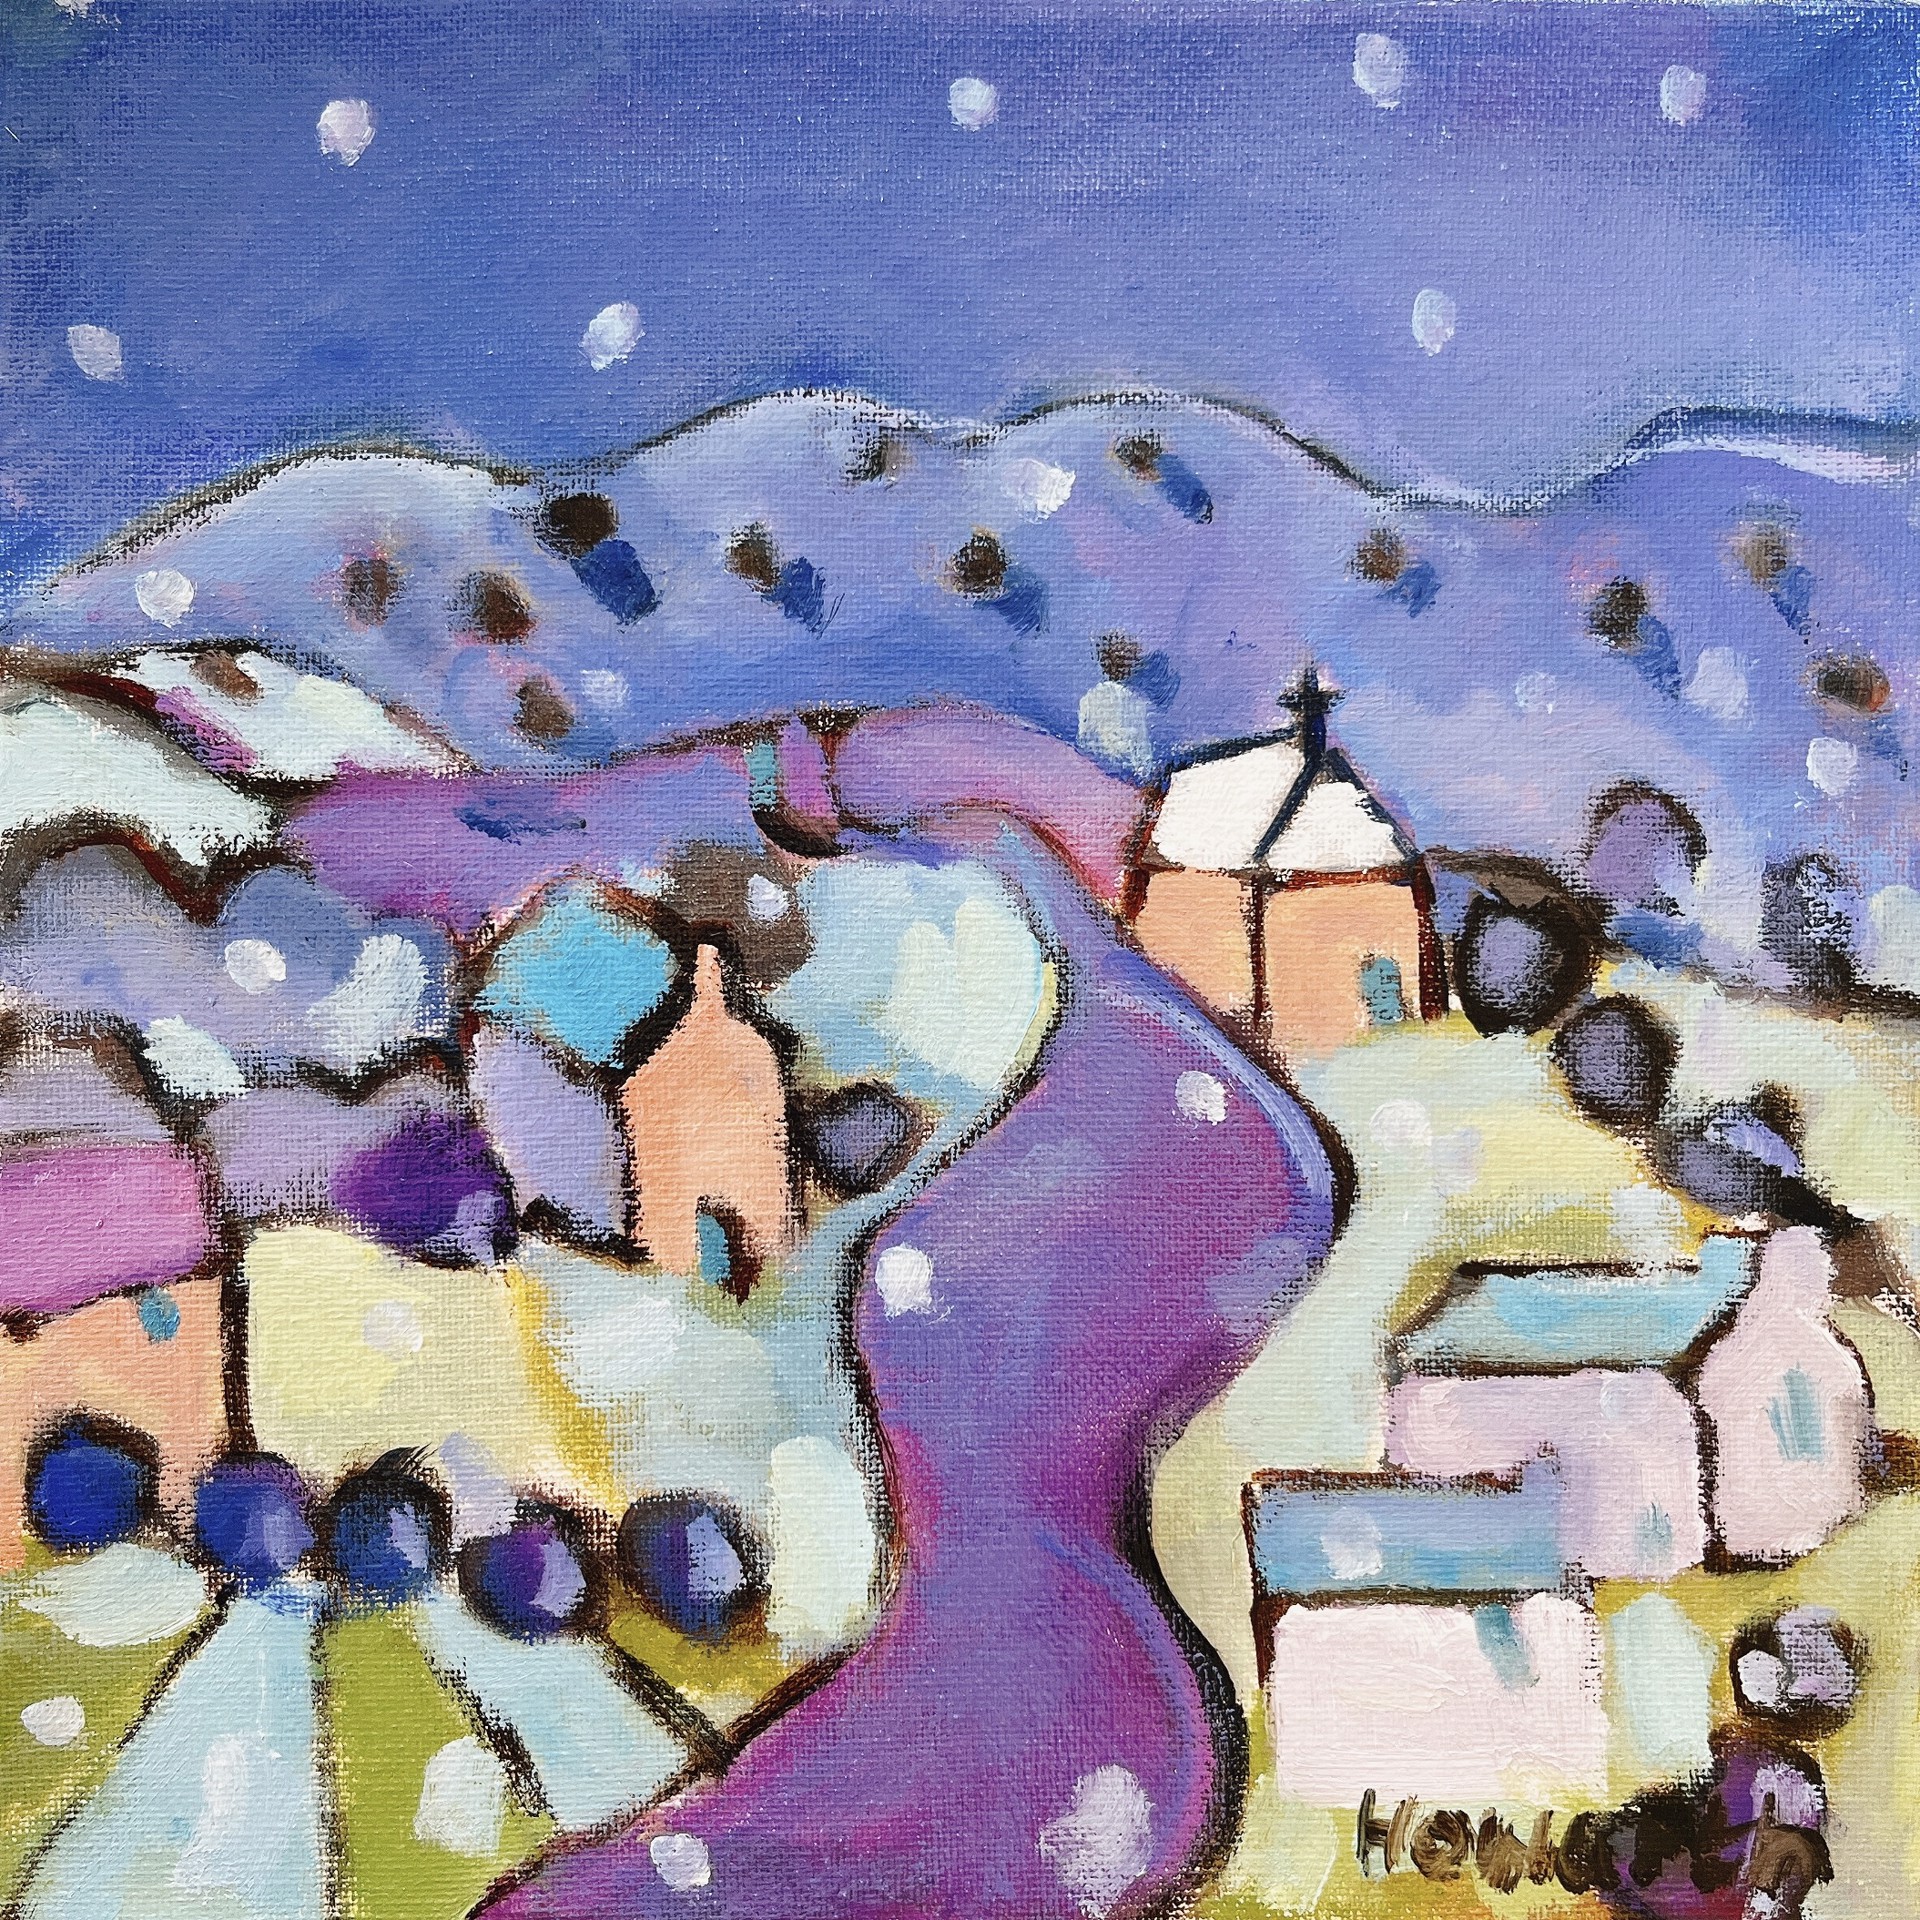 Evening Walk in the First Snow by Katrina Howarth